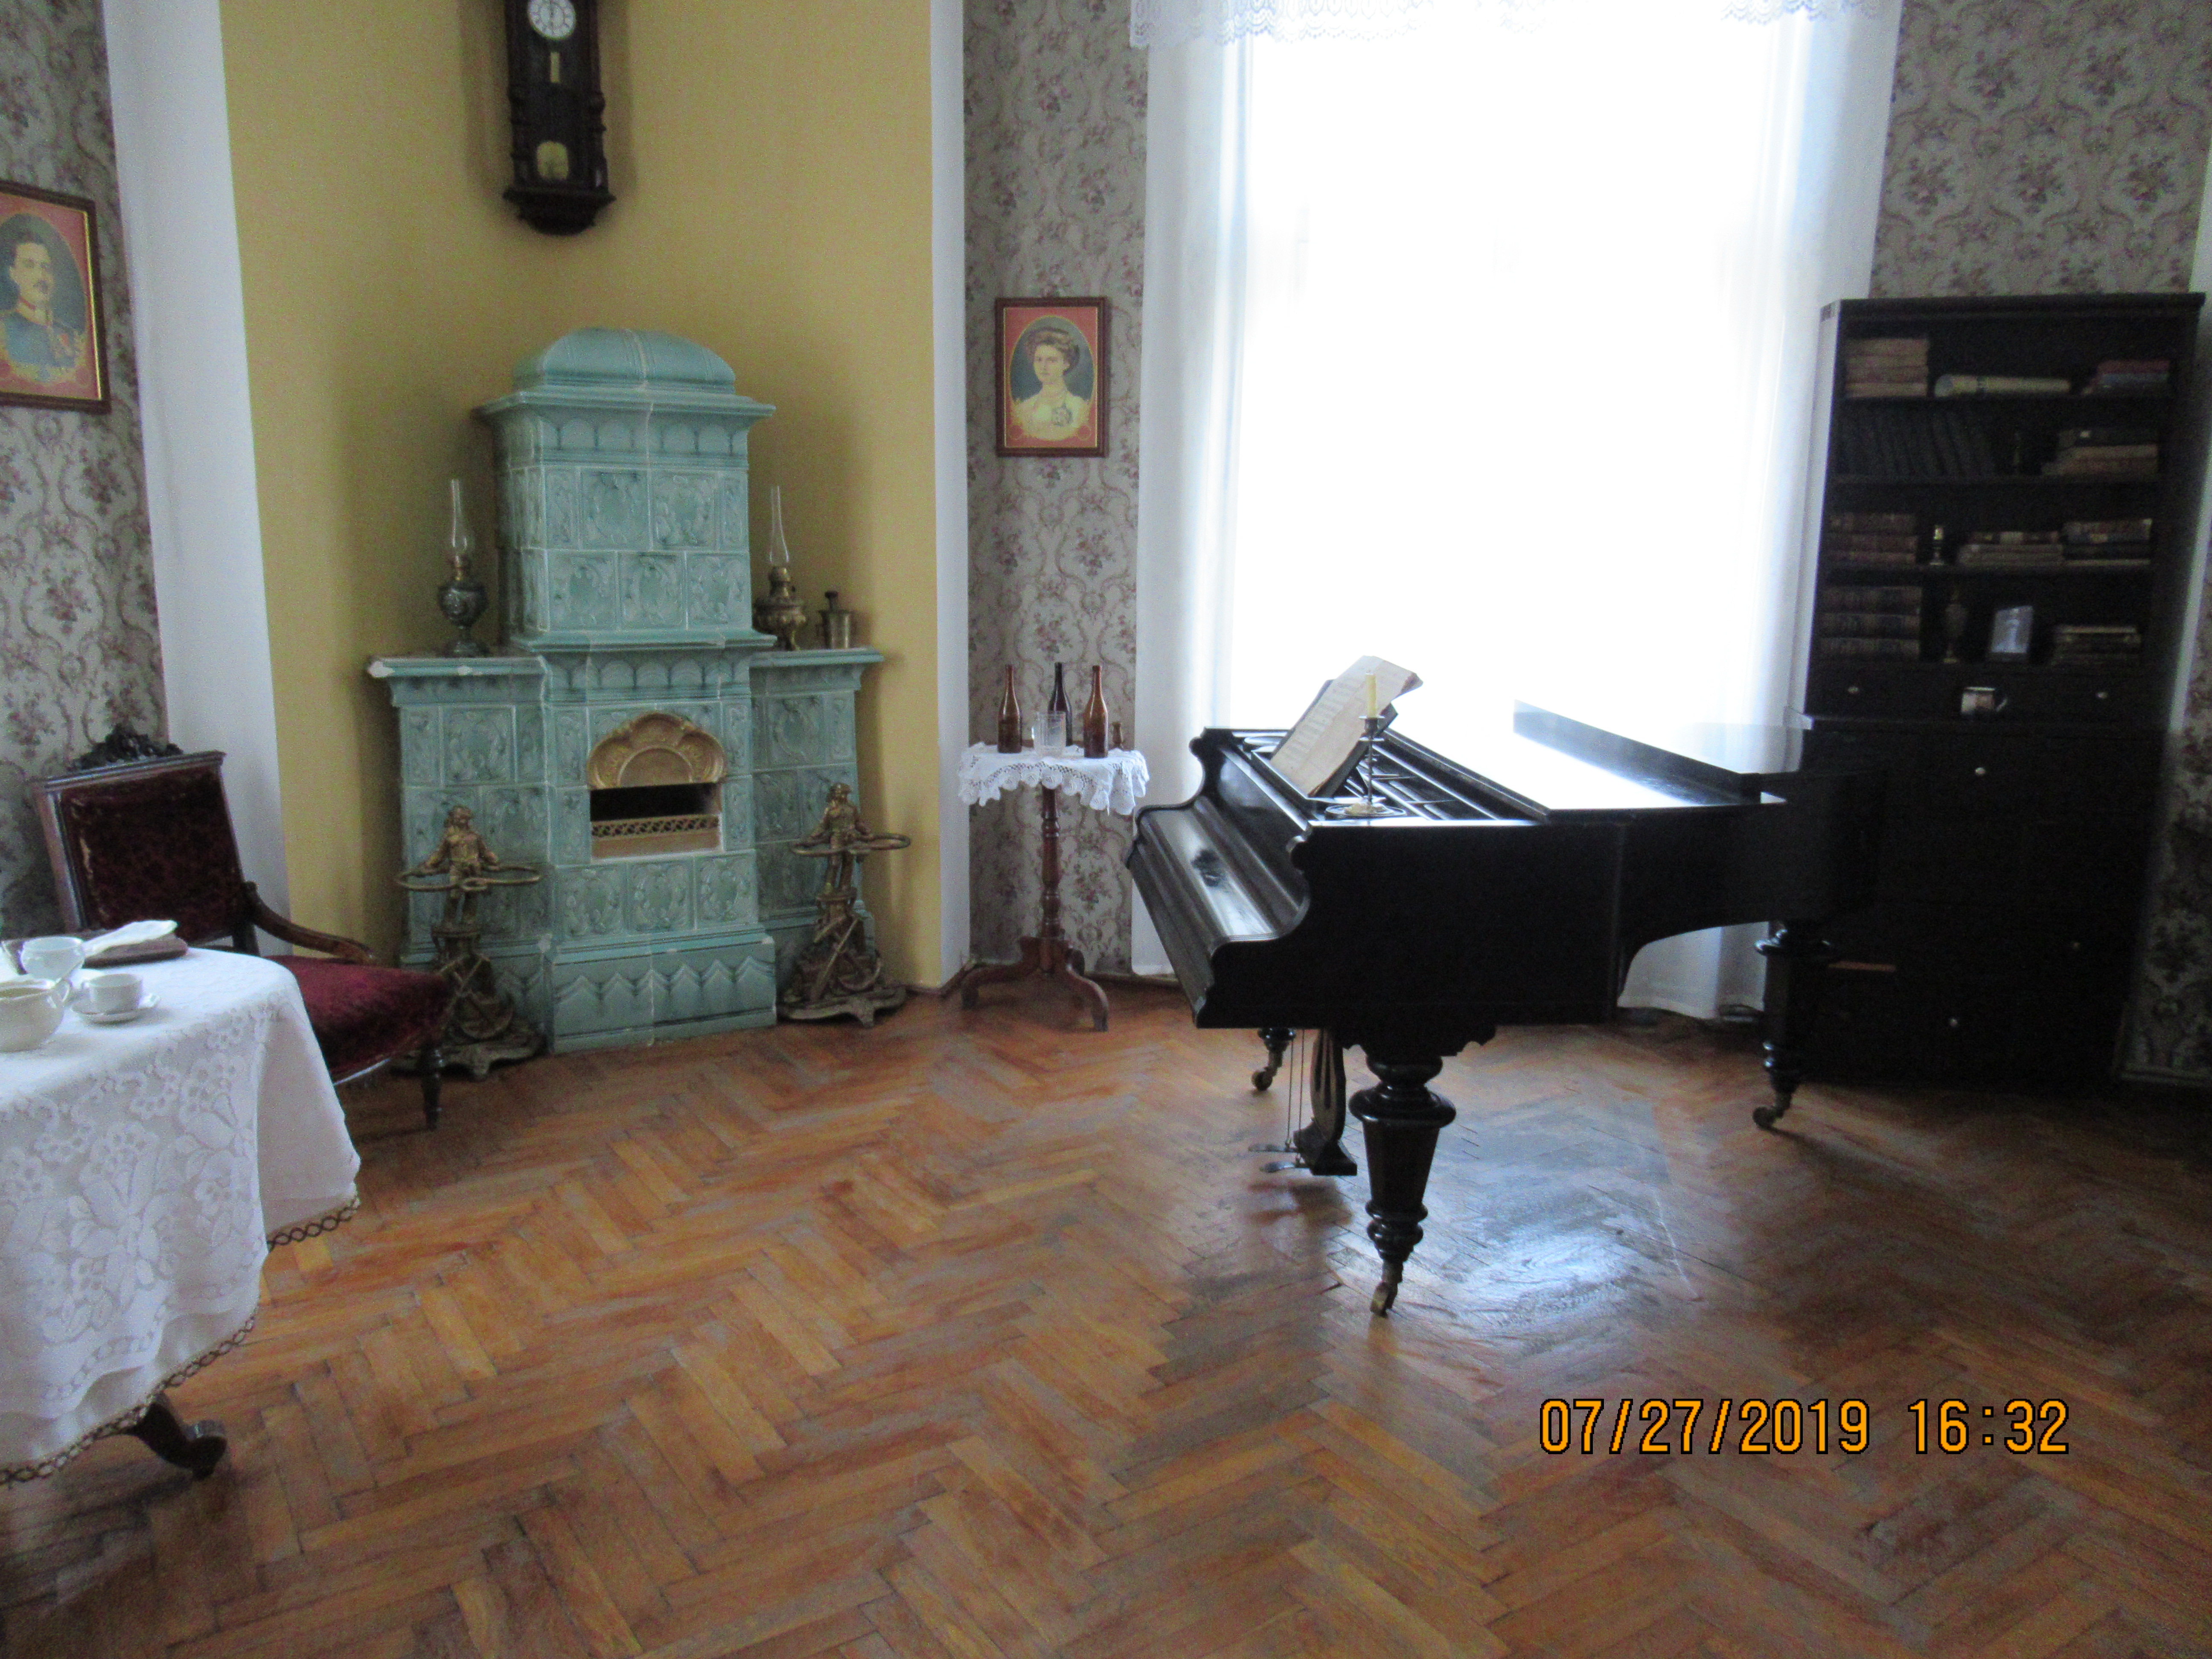 Early 20th century living room